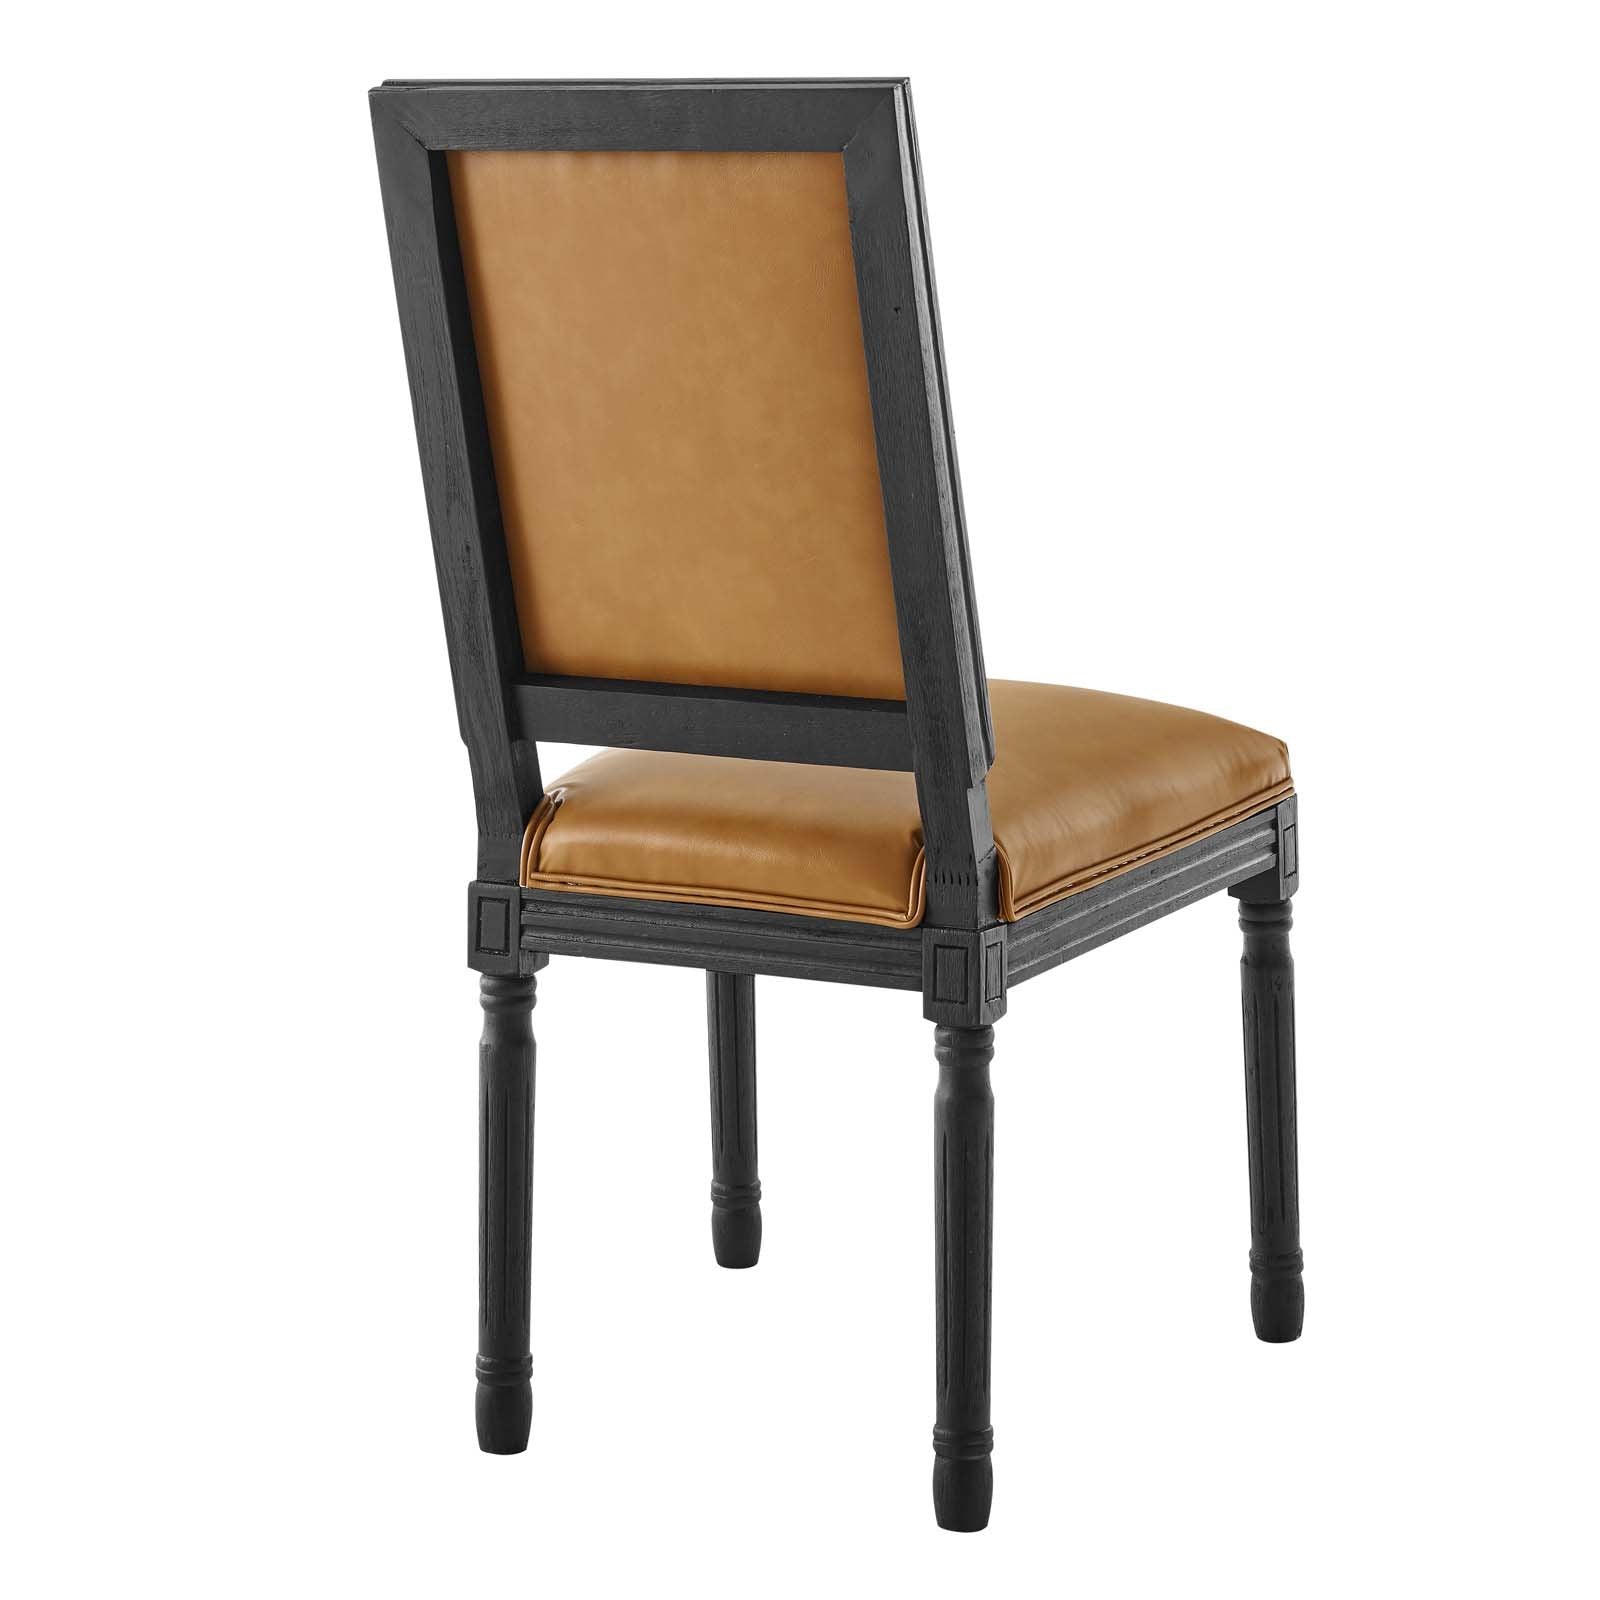 Court French Vintage Vegan Leather Dining Side Chair